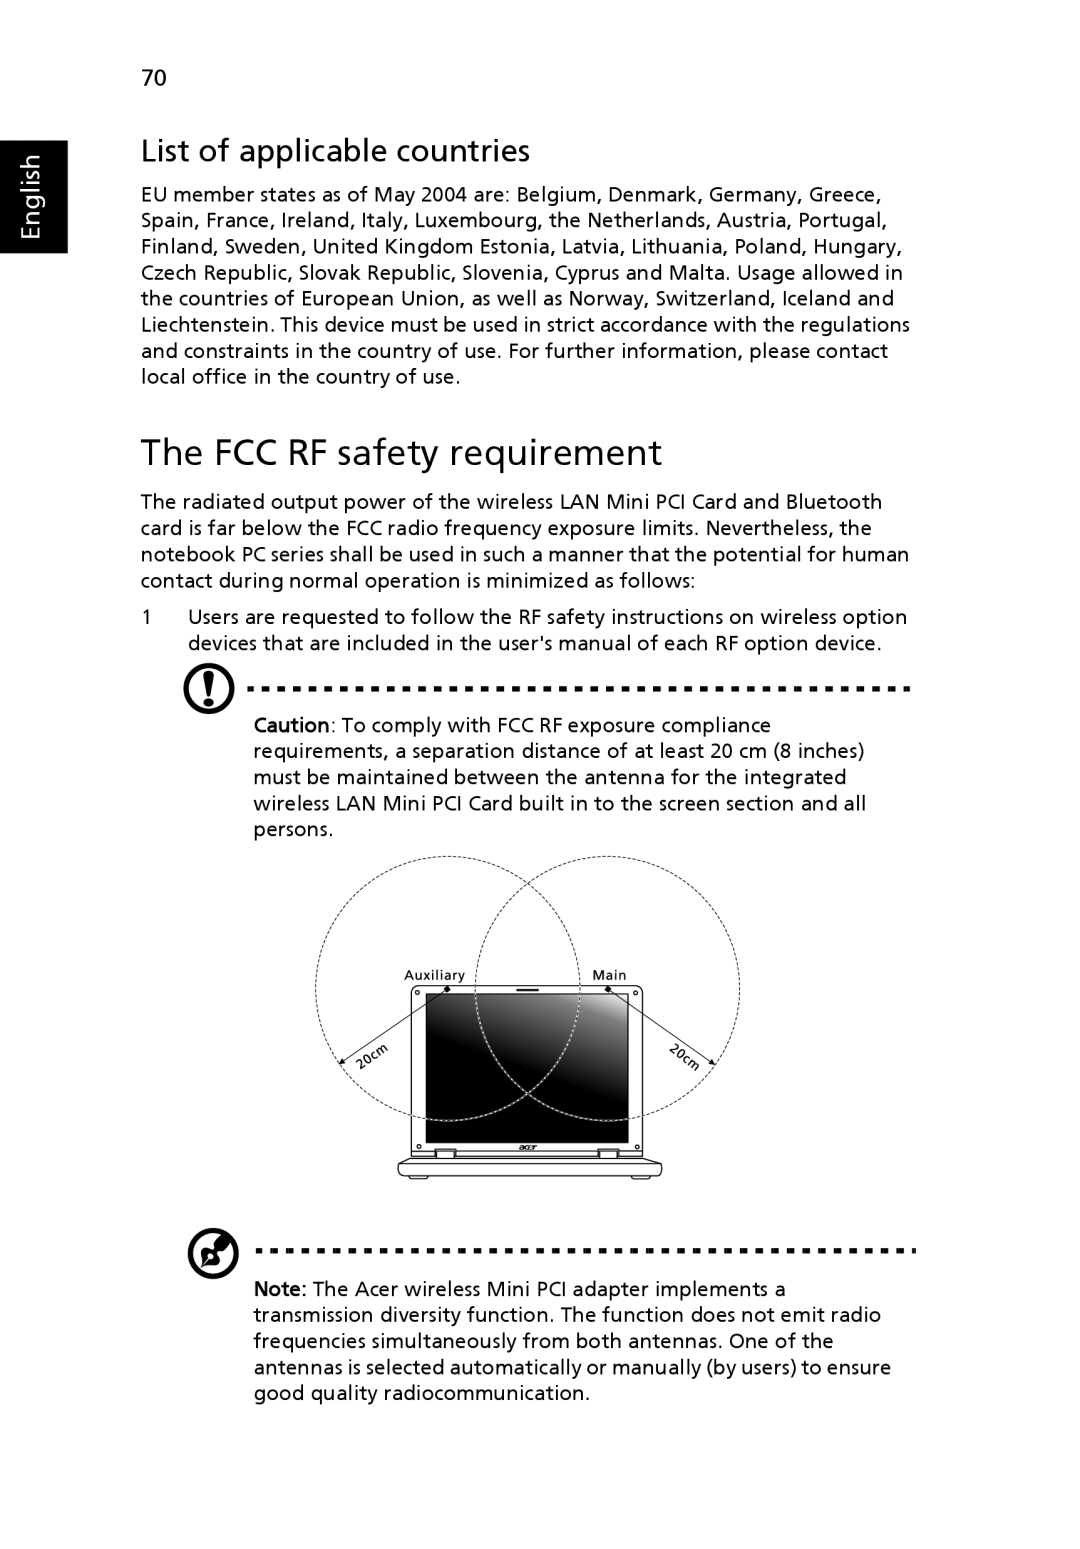 Acer 6492G, 6492 Series manual The FCC RF safety requirement, List of applicable countries, English 